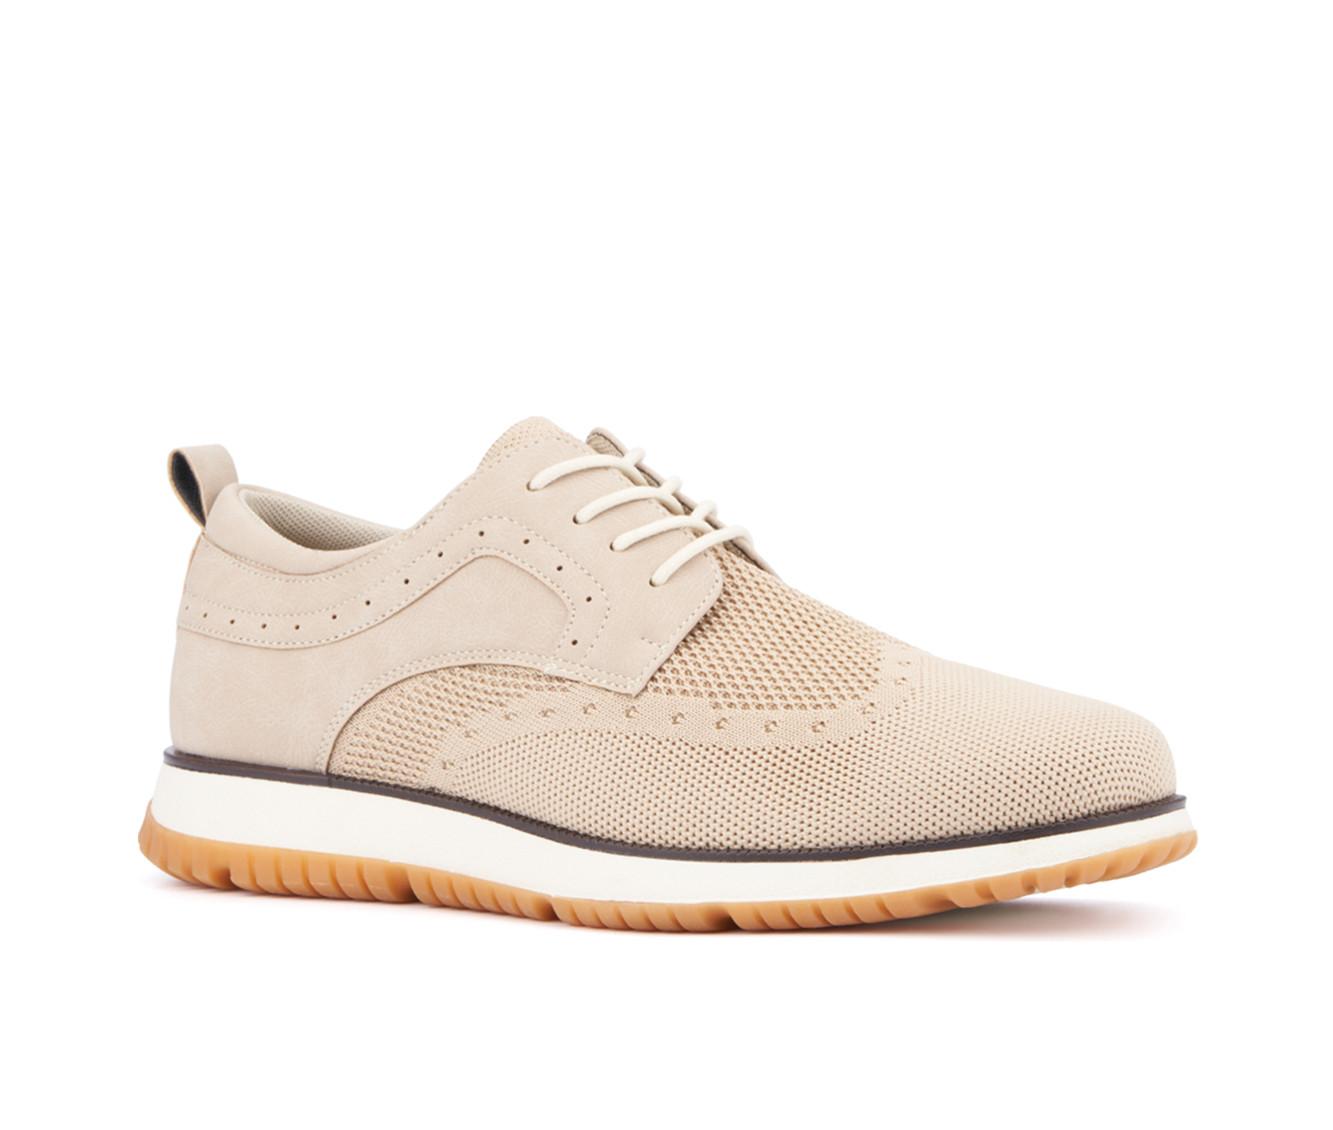 Men's New York and Company Wiley Casual Oxfords